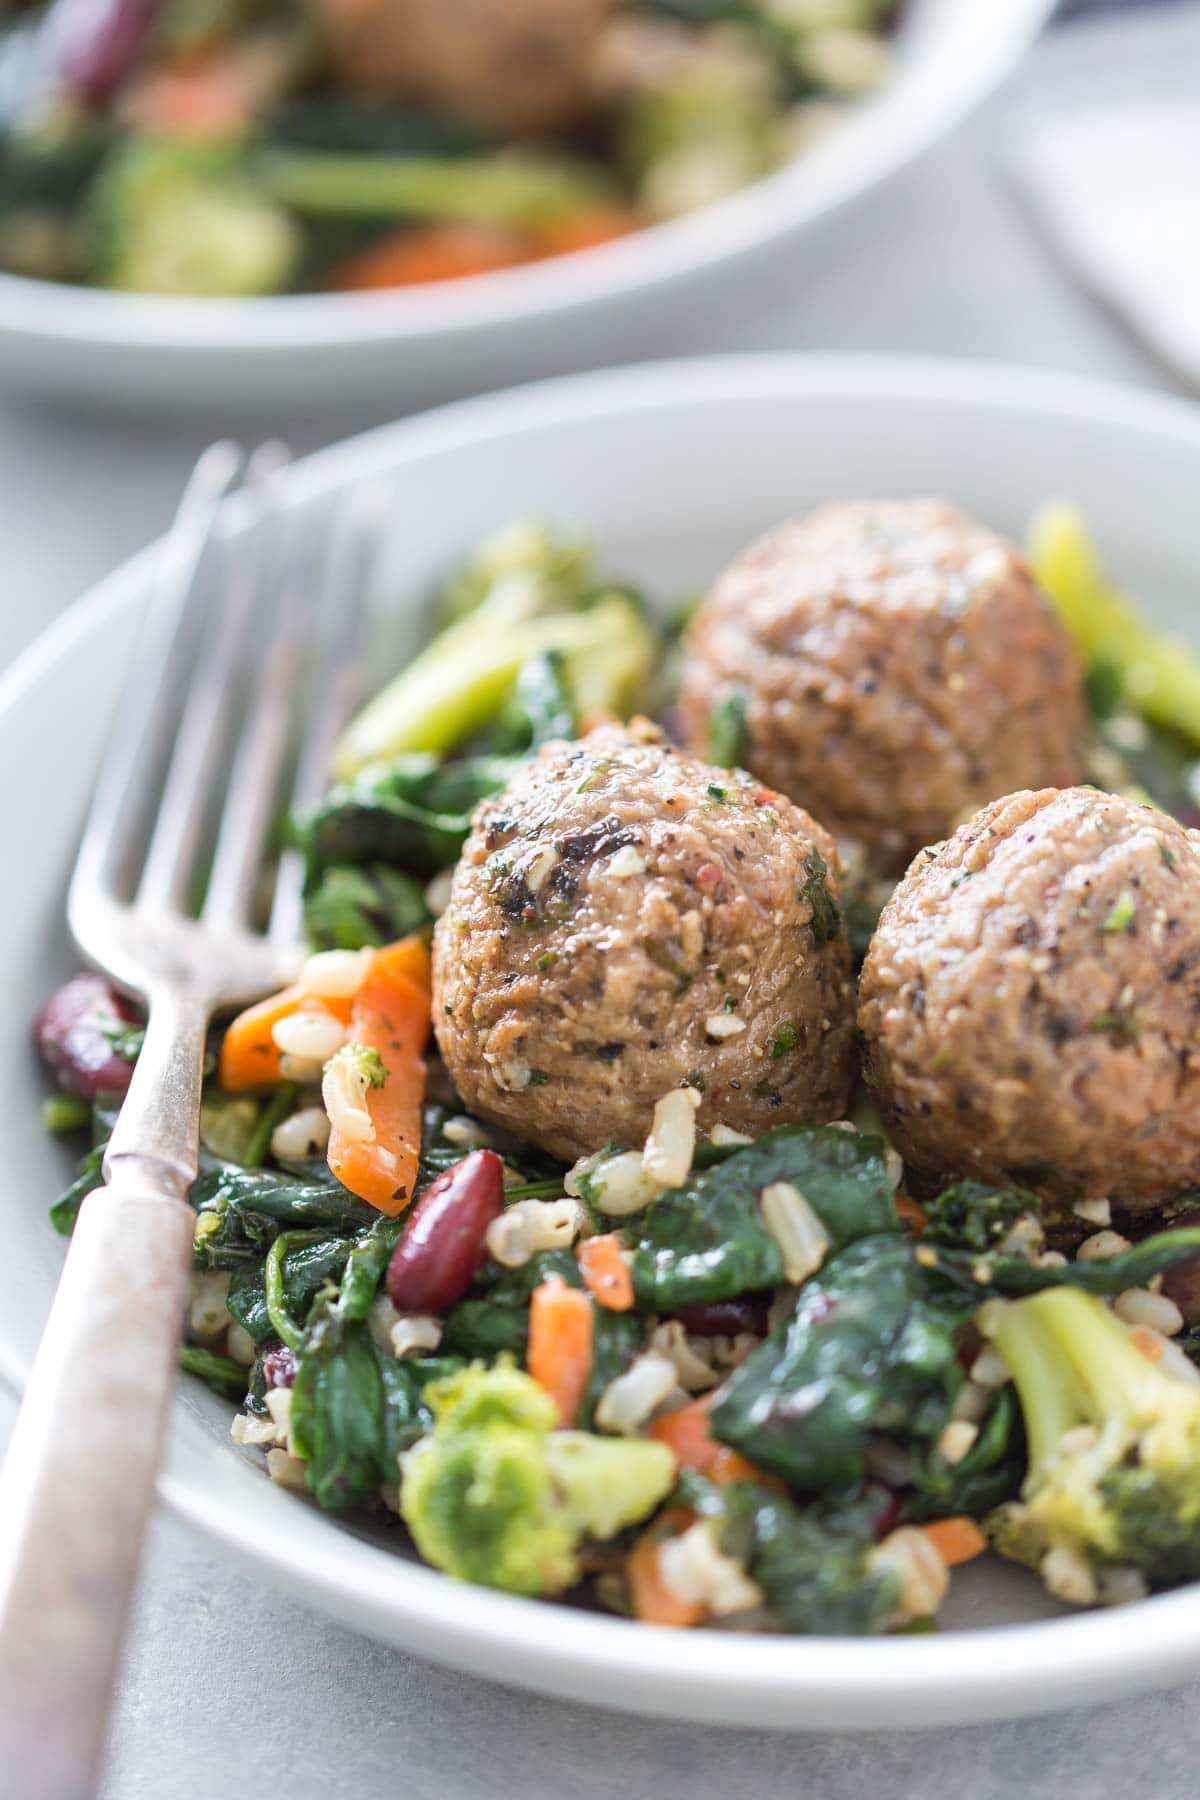 Meatless Meatball and Vegetable Skillet